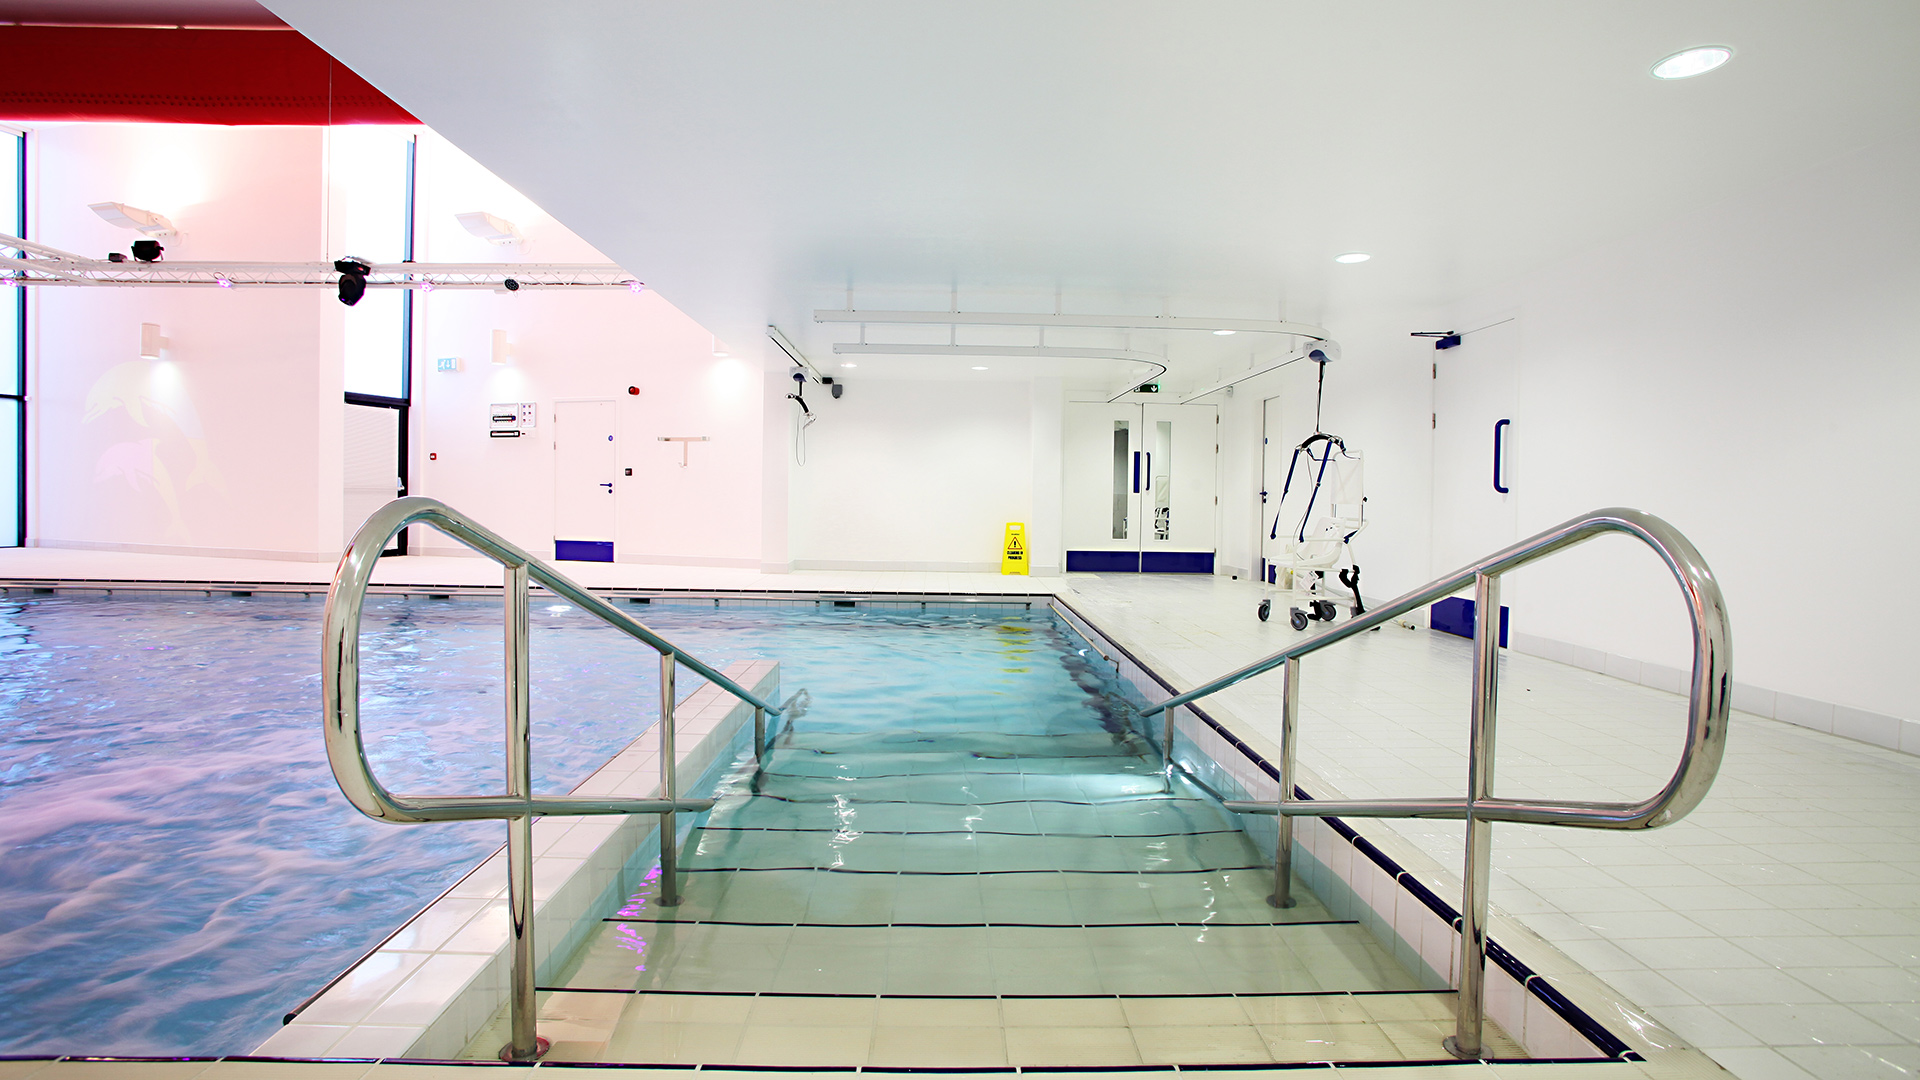 stairs leading into a hydrotherapy pool with accessible chair into pool in the background